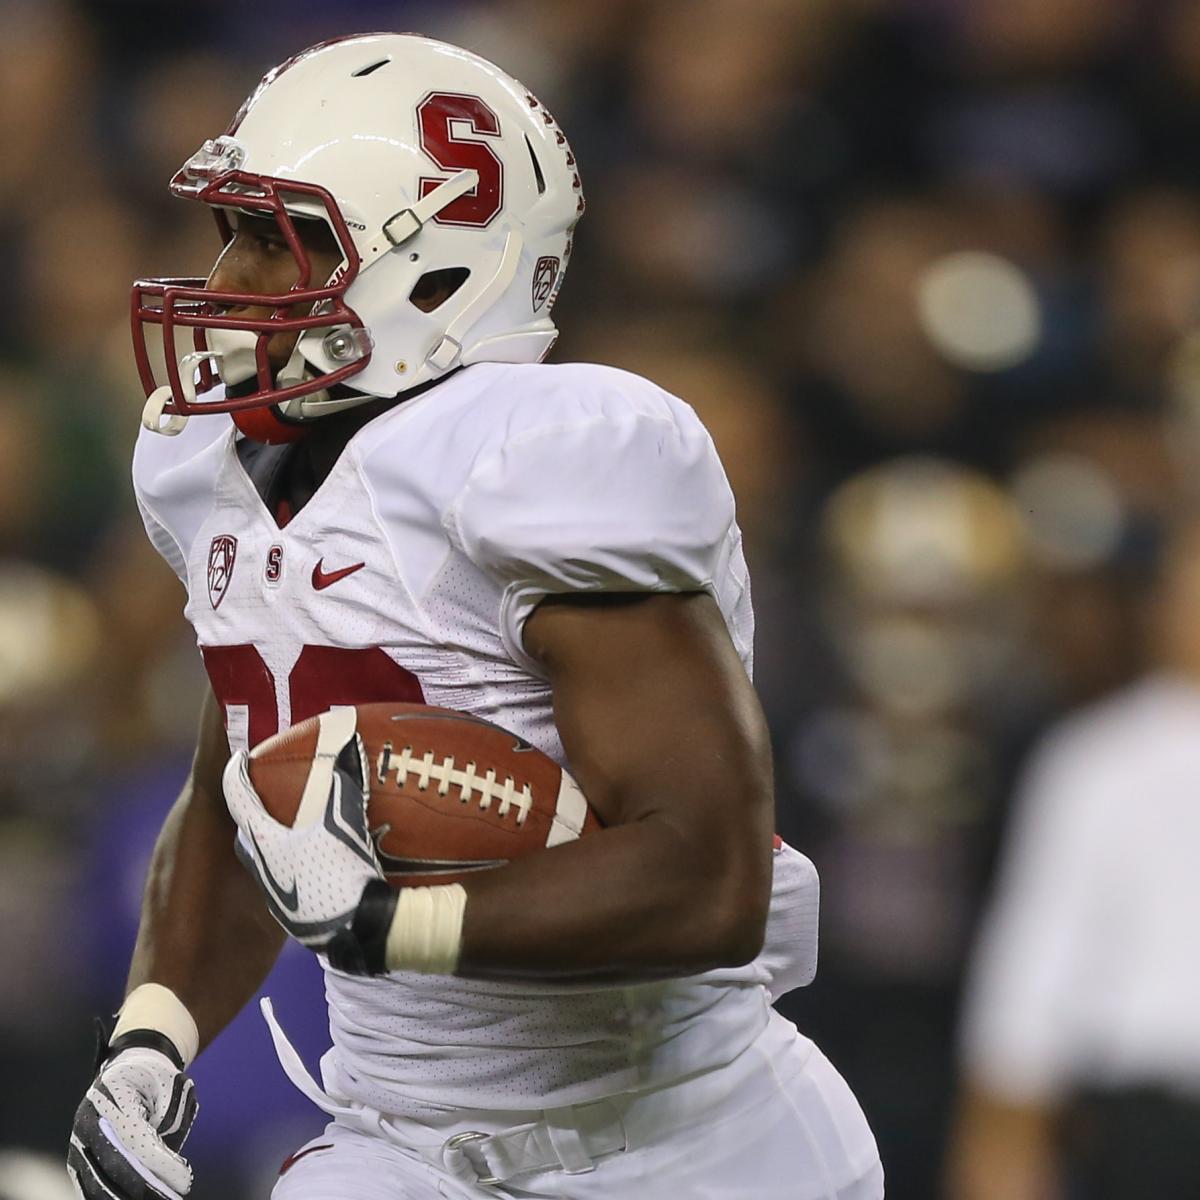 Stanford vs. Arizona Which Team's RB Will Be More Dominant? News